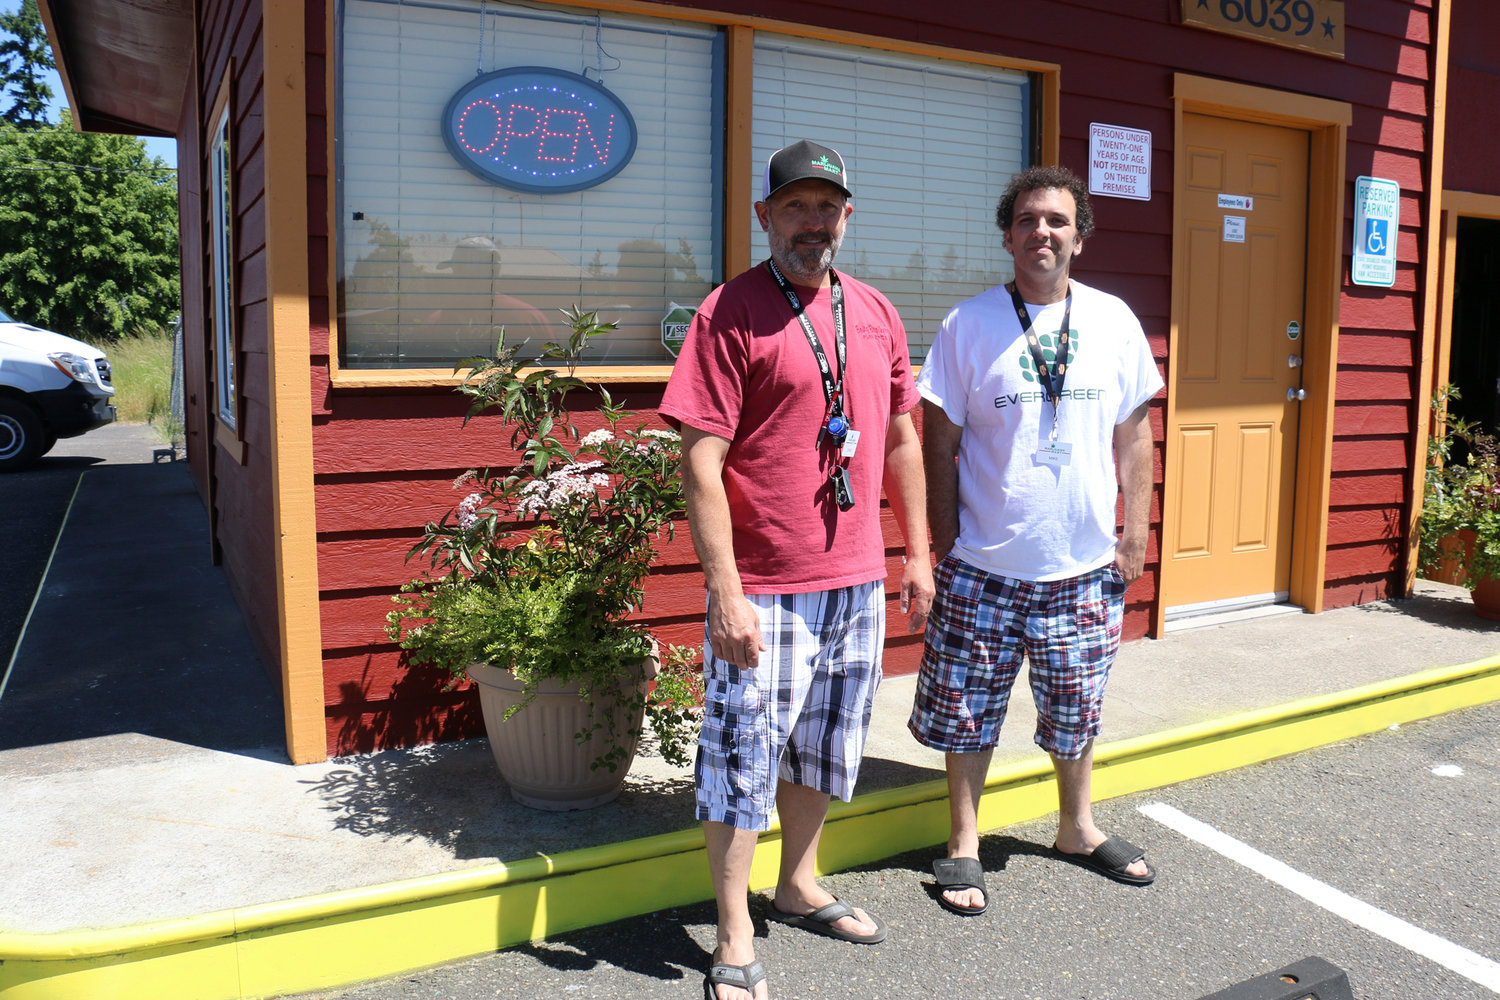 Derek Wilmot and Mike Trobman stand in front of their business Marijuana Mart in Grand Mound on Monday. They are two of the three business partners who opened the store on May 27 as the first recreational marijuana store in the town.